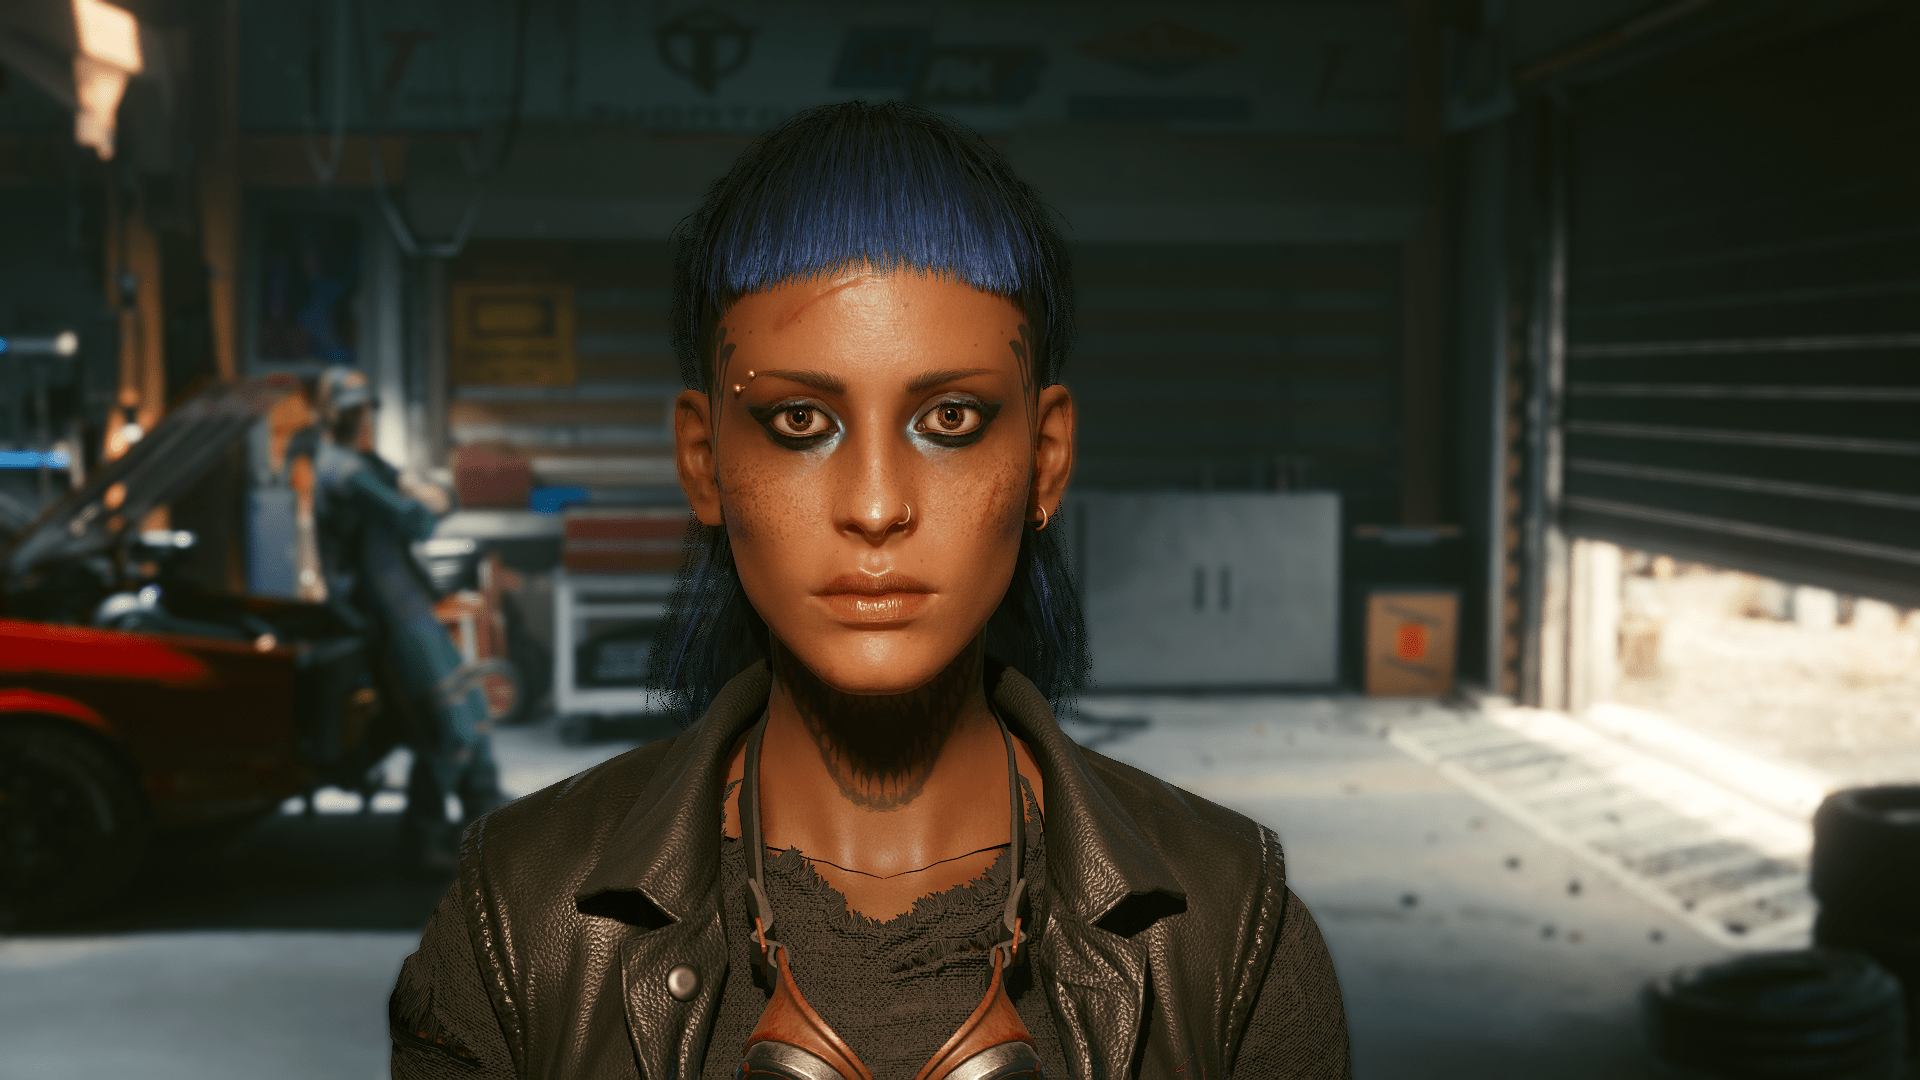 Blue-haired female lead - wide 1